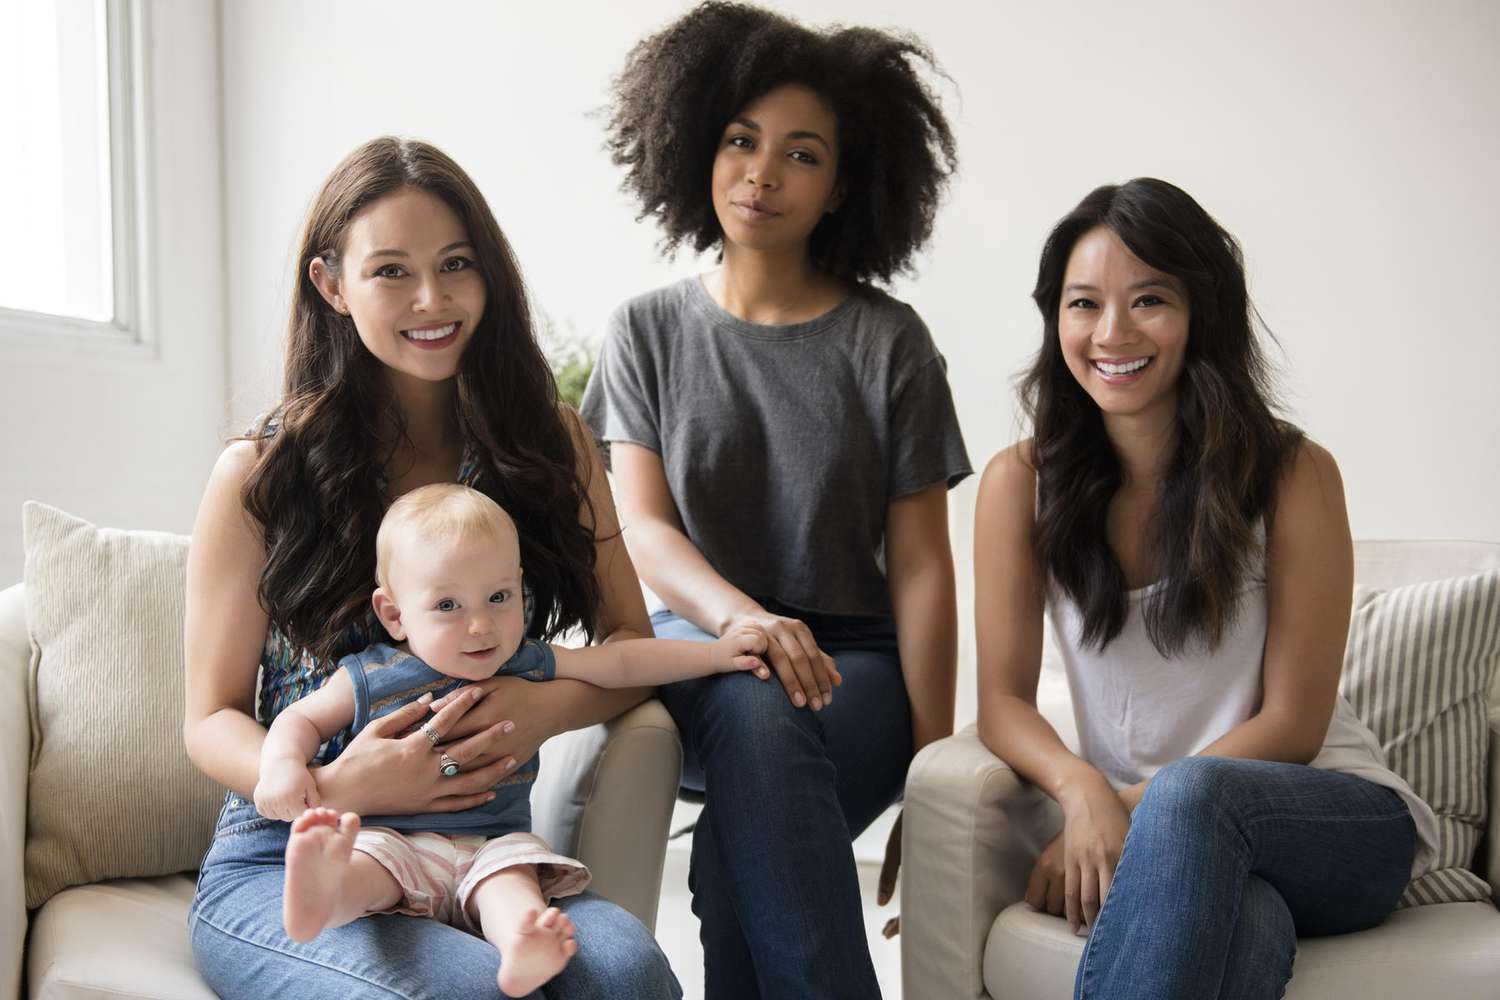 Group of smiling friends with a baby